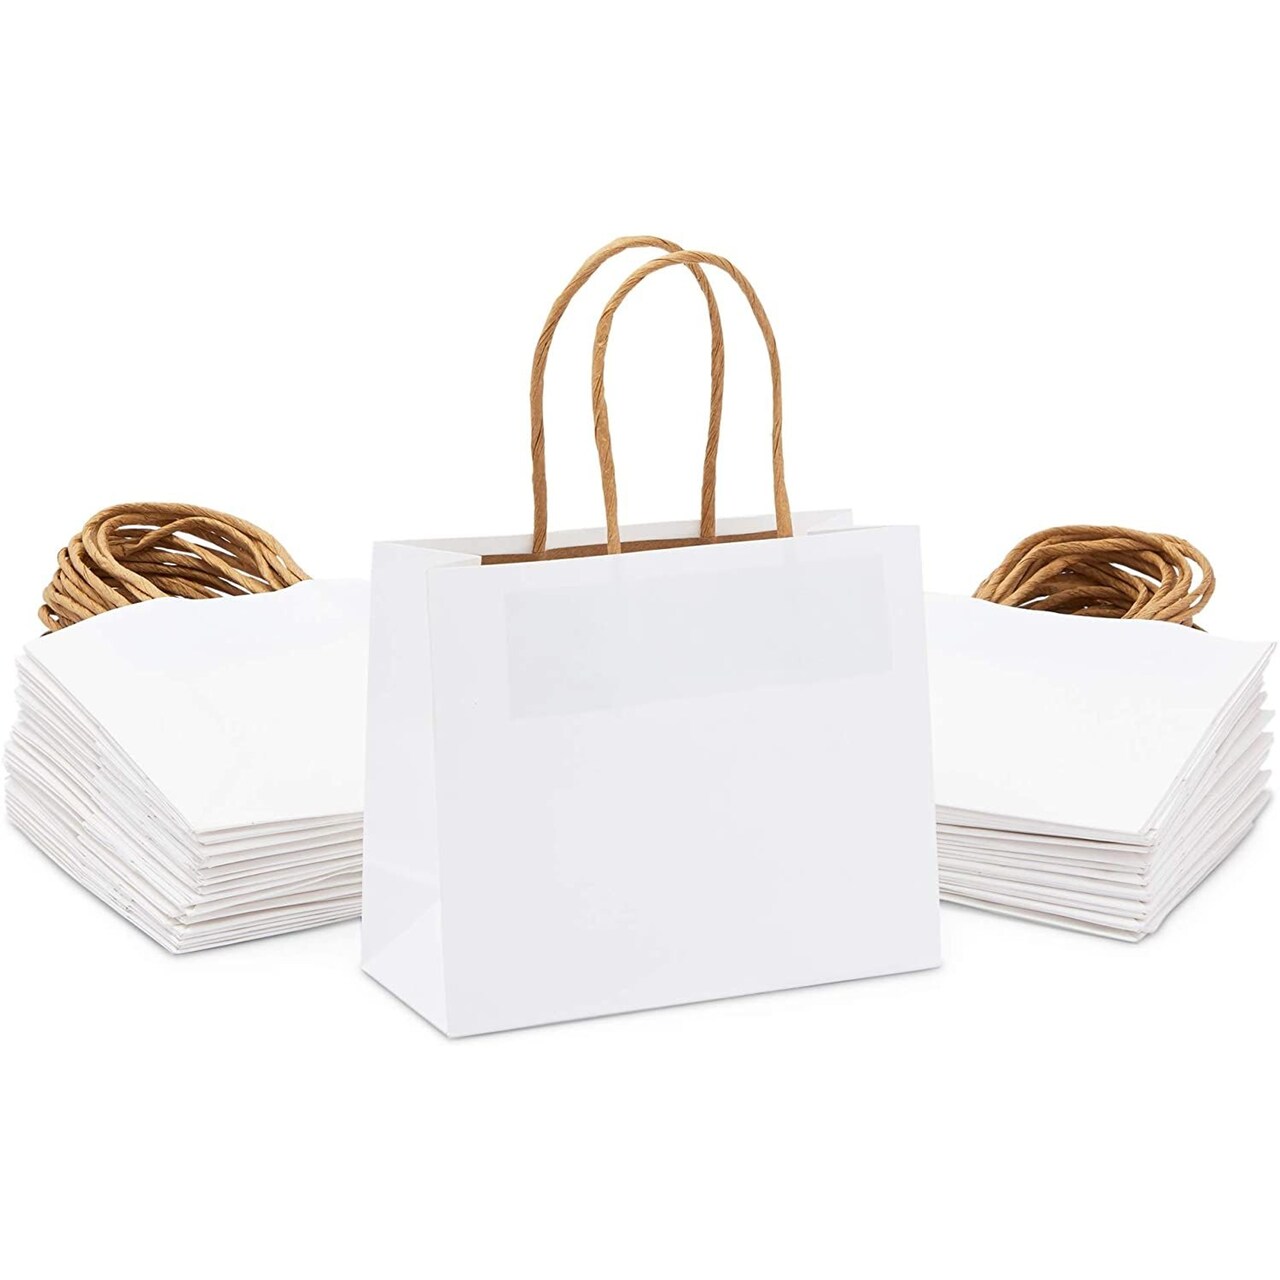 Mini White Paper Thank You Gift Bags with Handles for Baby Shower, Birthday Party (50 Pack)